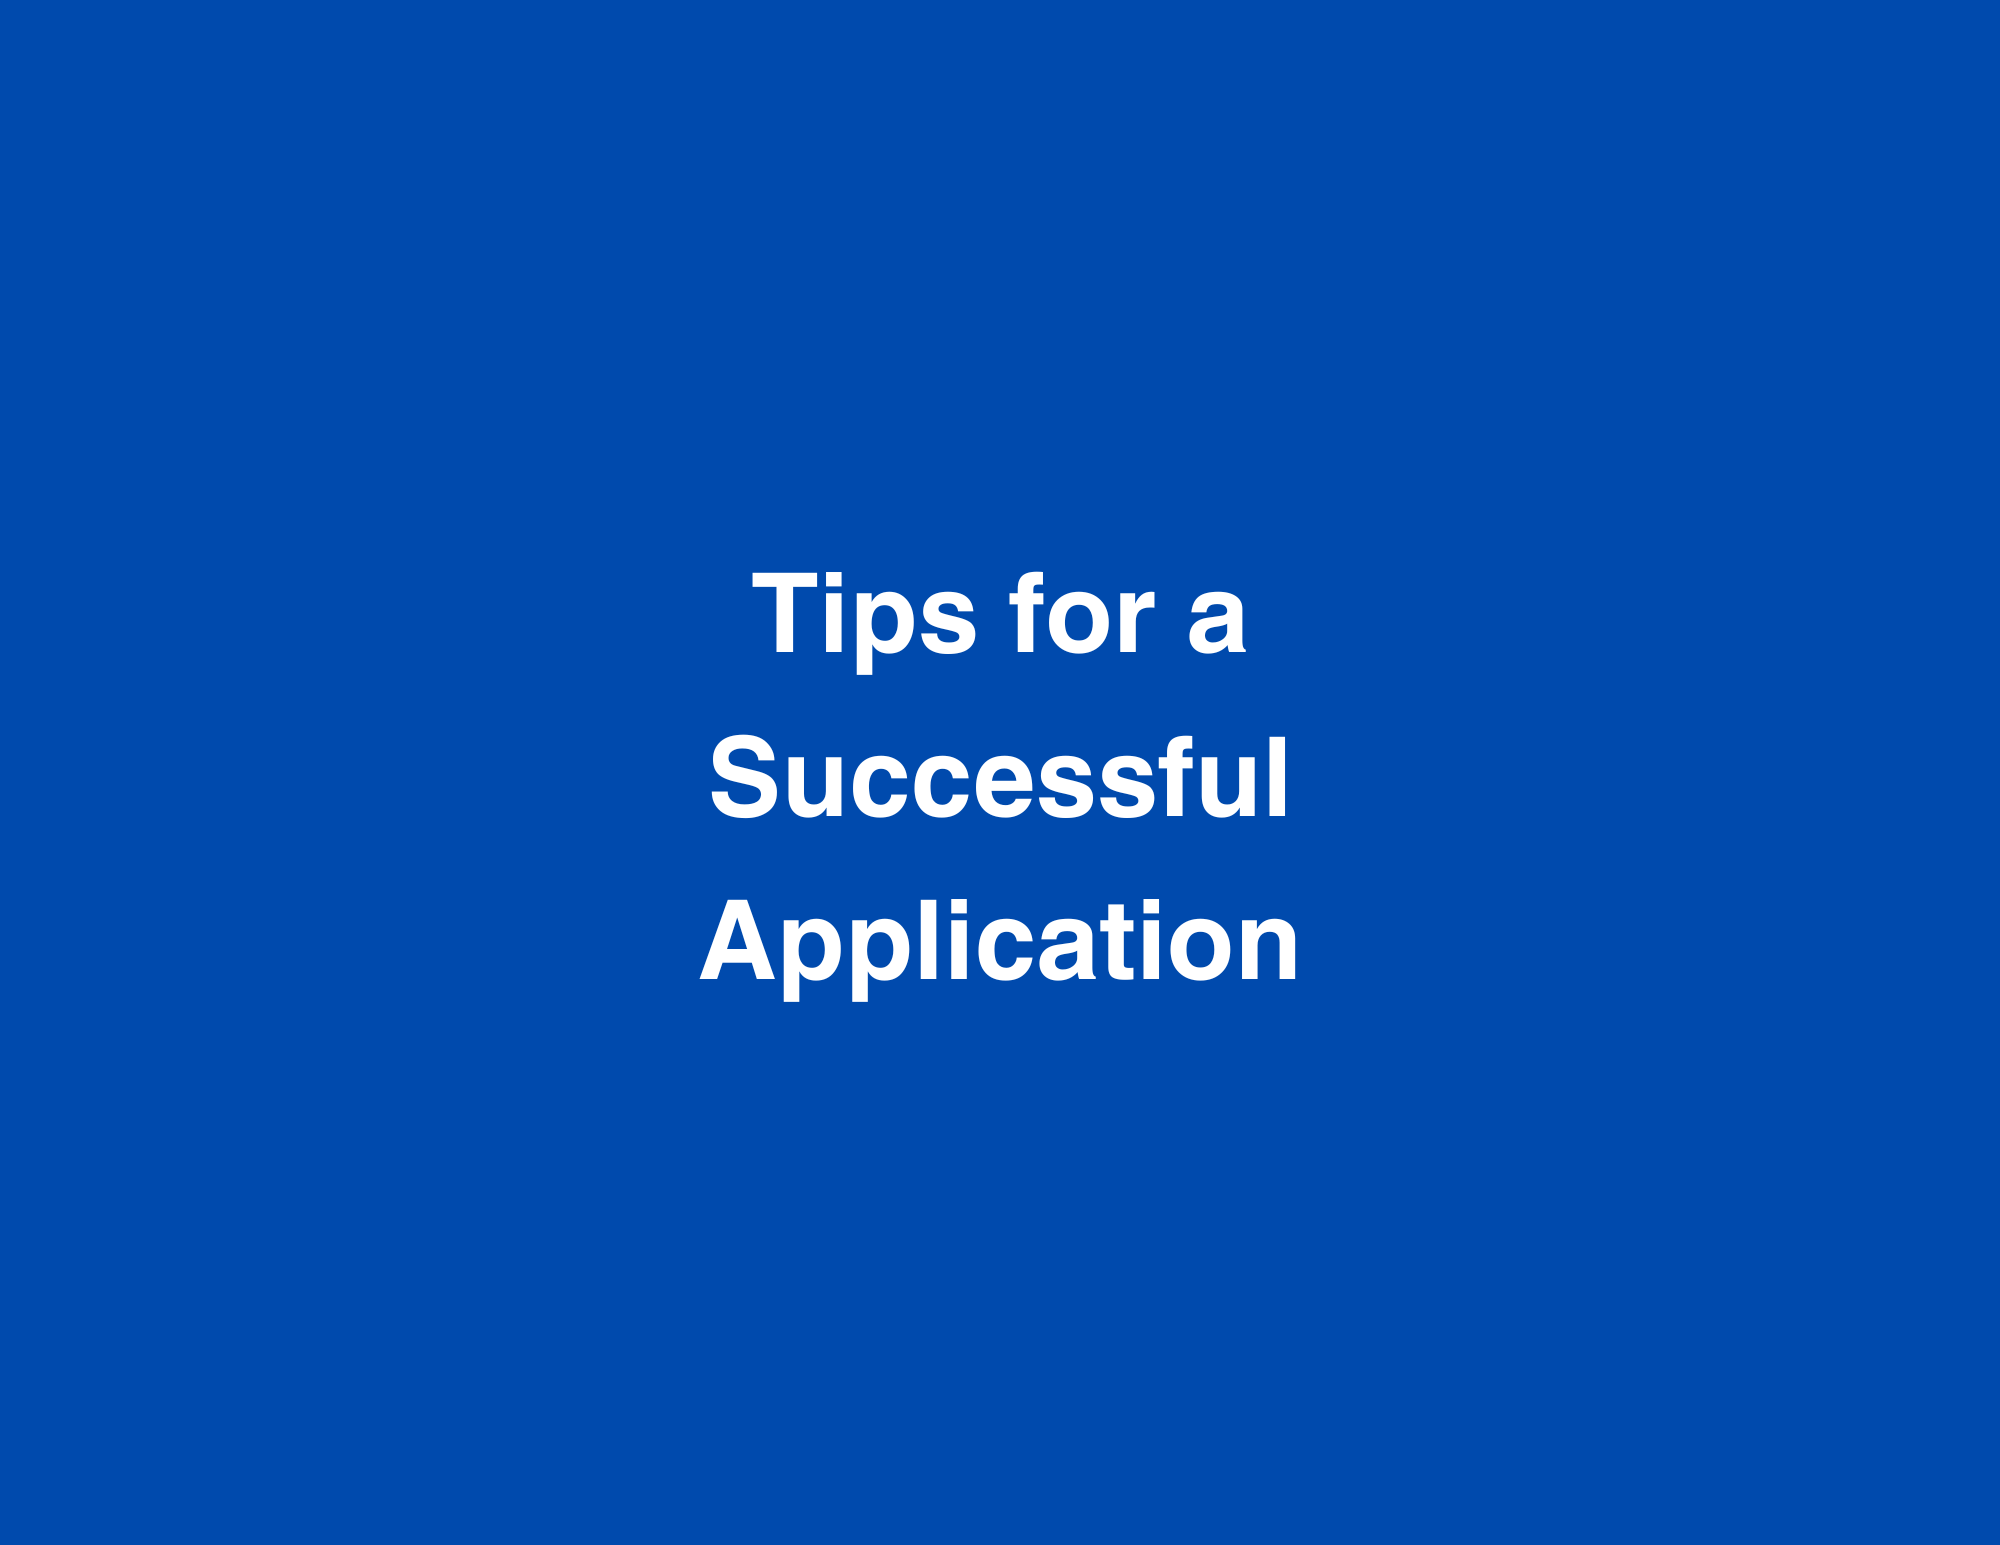 Tips for a Successful Application